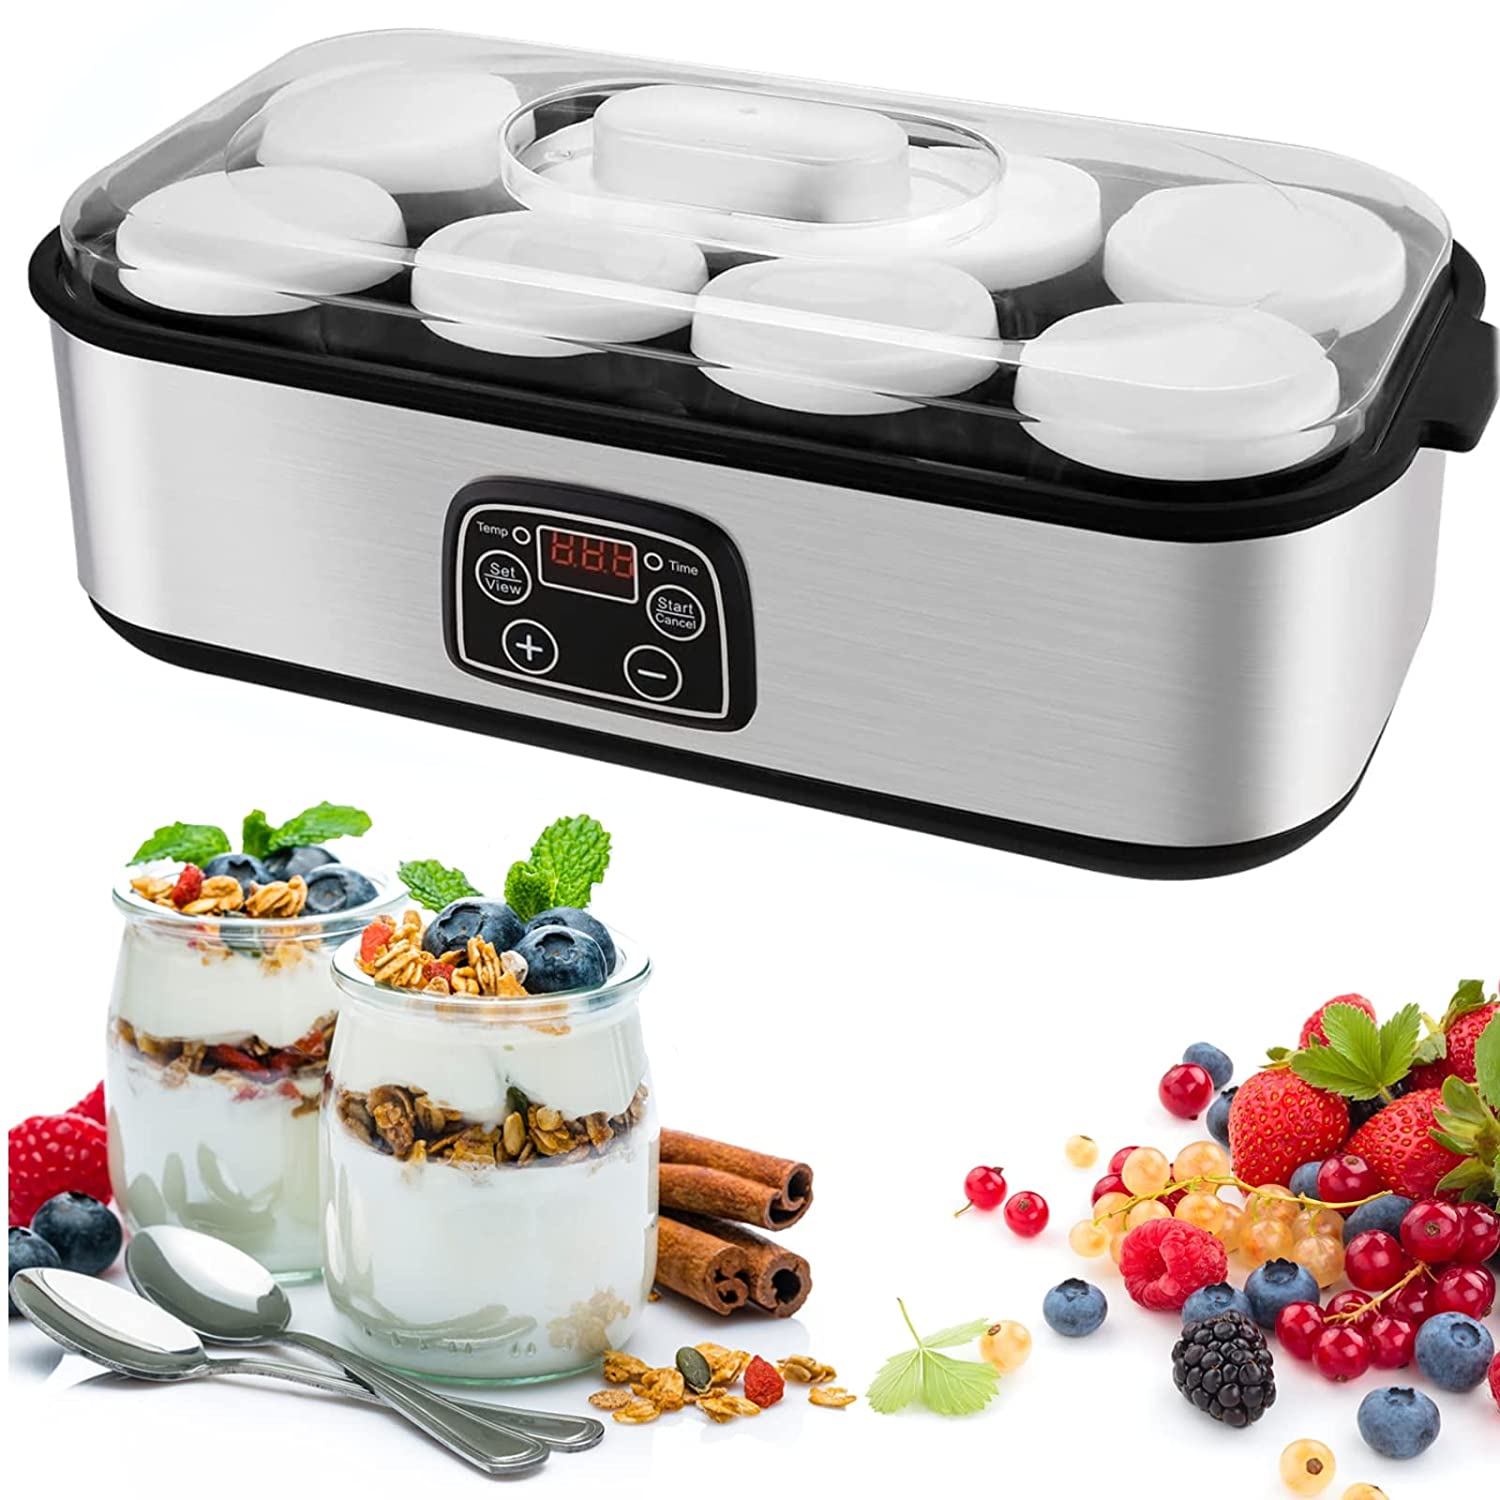 Momboo Yoghurt Maker, Yoghurt Maker with LCD Display, Electric Yoghurt Maker, with Temperature Control, Includes 8 Cups, Automatic Shut-Off, LCD Display, 8-48H, 20°C - 55°C